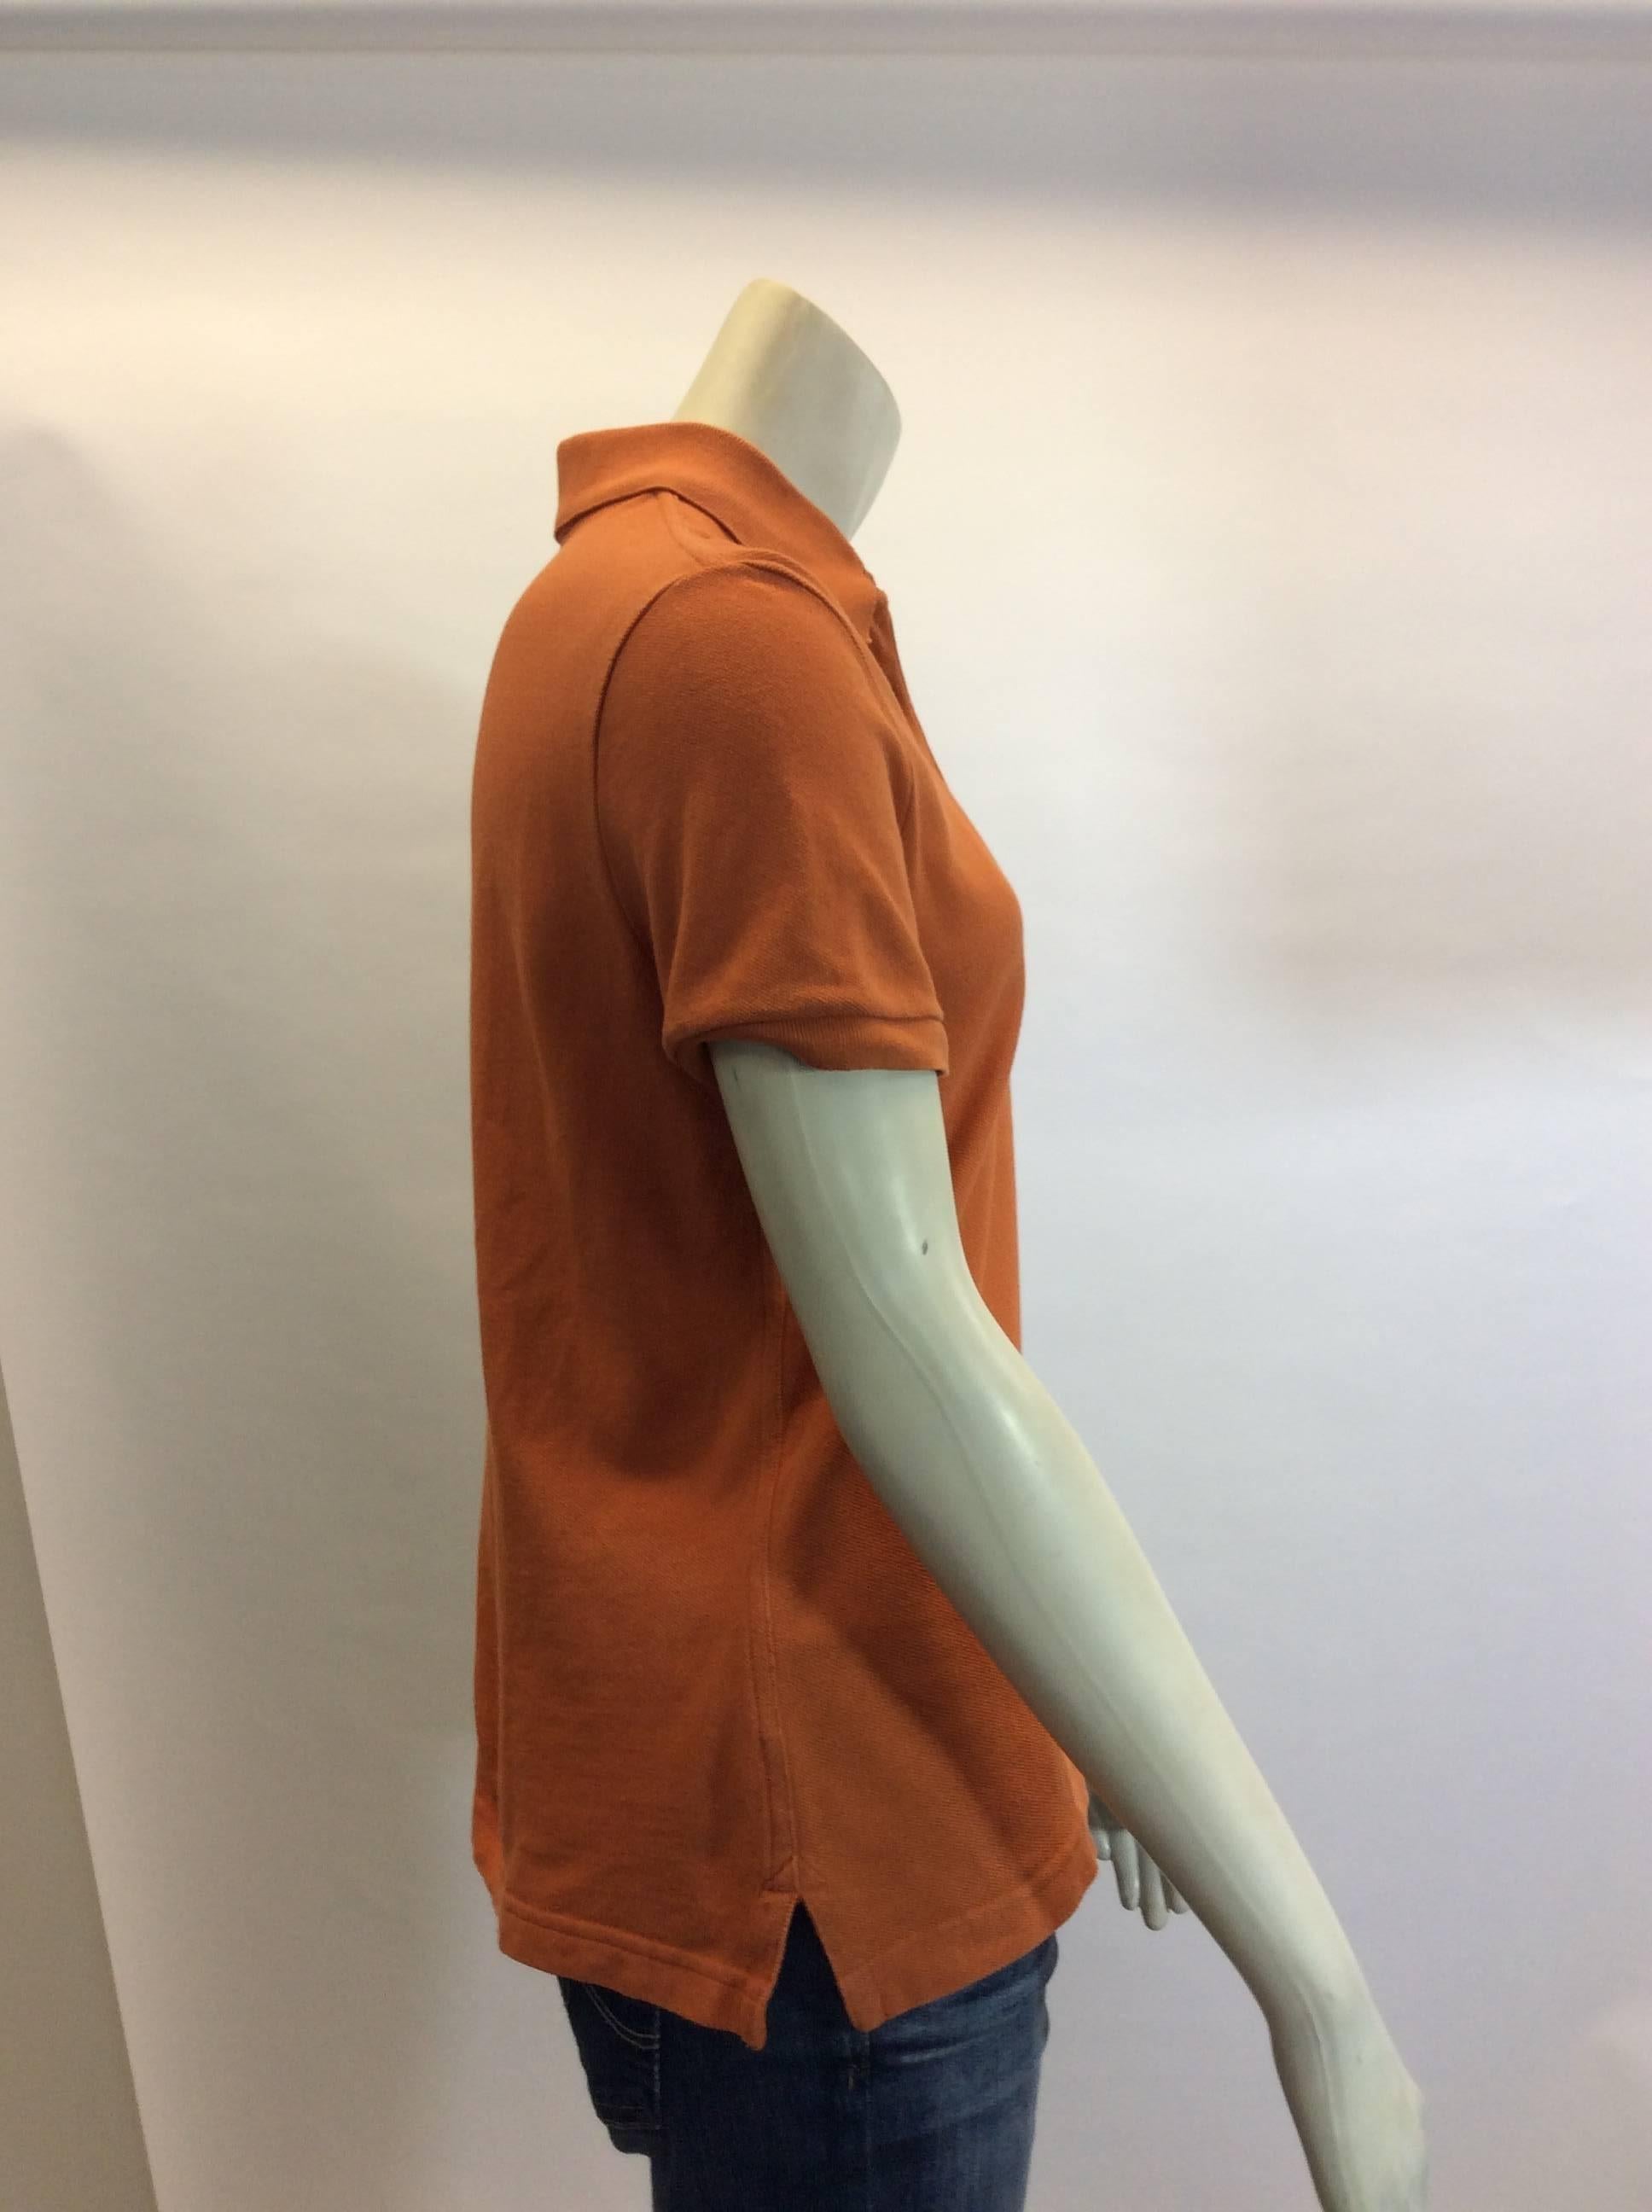 Hermes Orange Cotton Polo
100% cotton
Made in Italy 
$108
Short sleeve
H logo on front